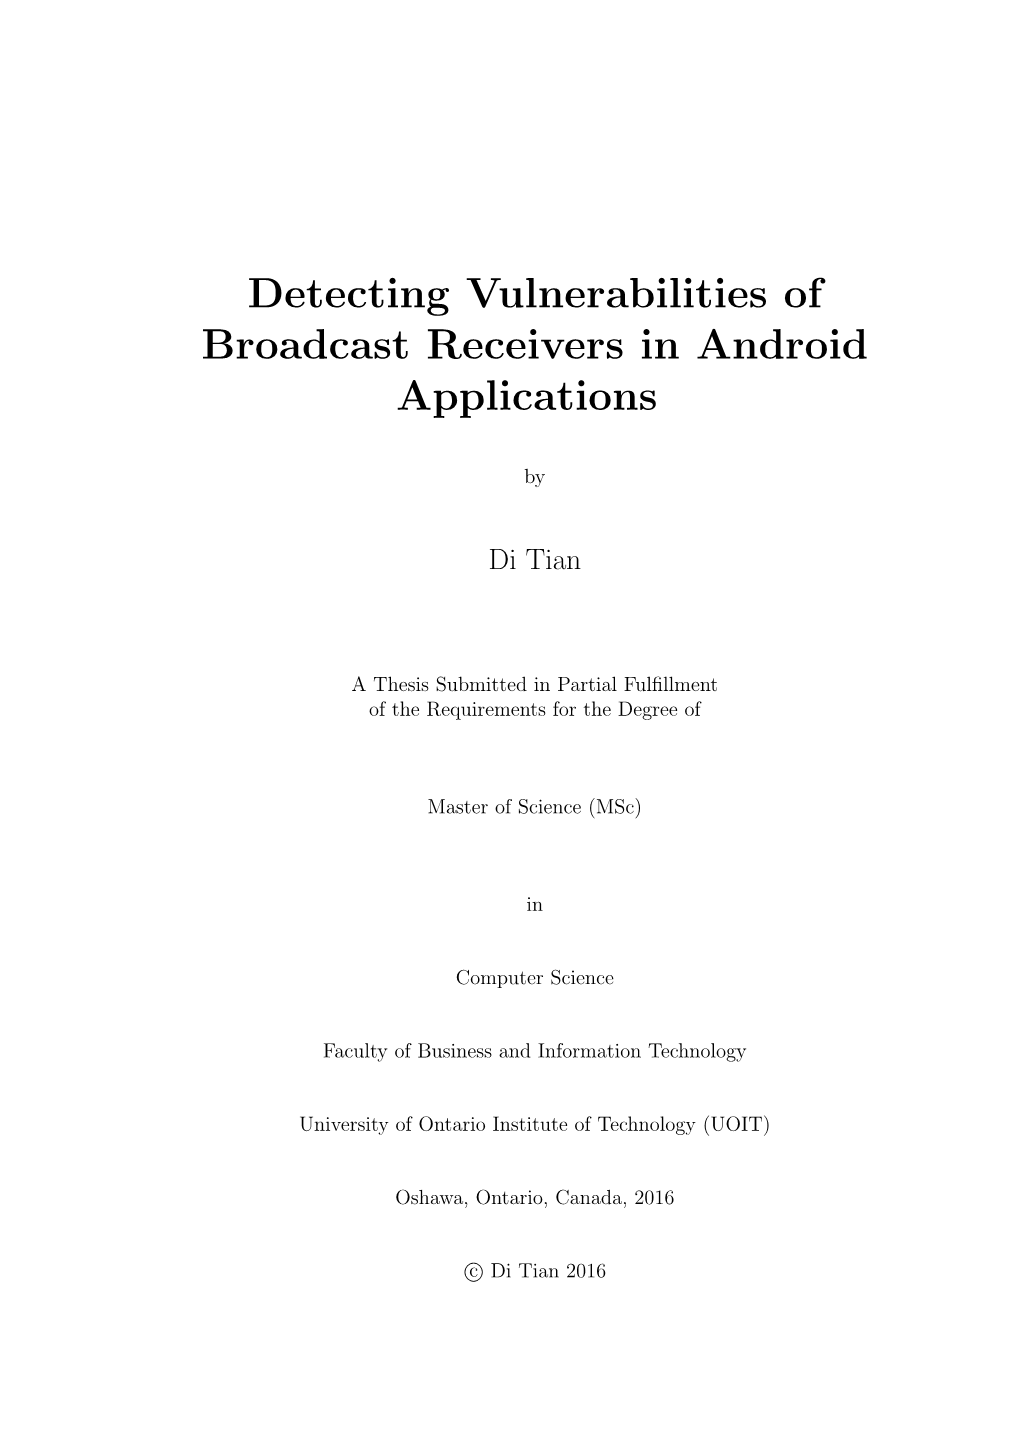 Detecting Vulnerabilities of Broadcast Receivers in Android Applications